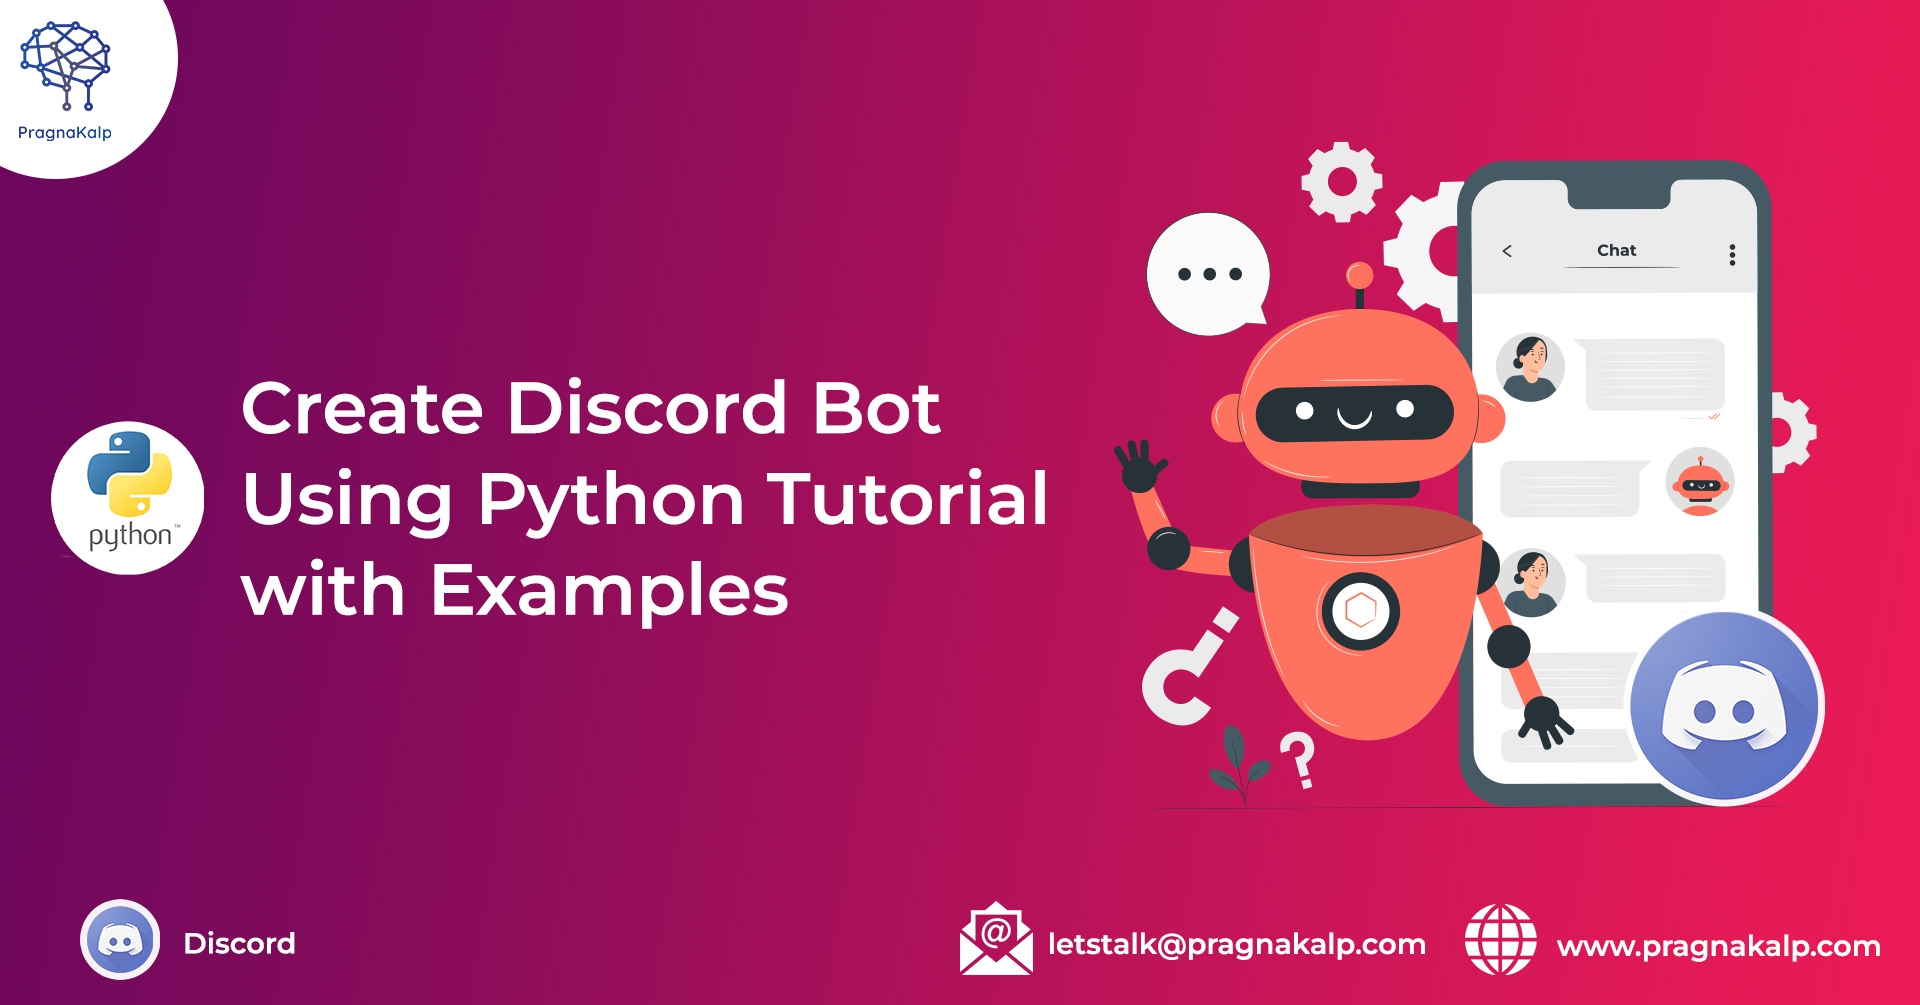 How To Get A Discord Bot Token (Step-by-Step Guide)